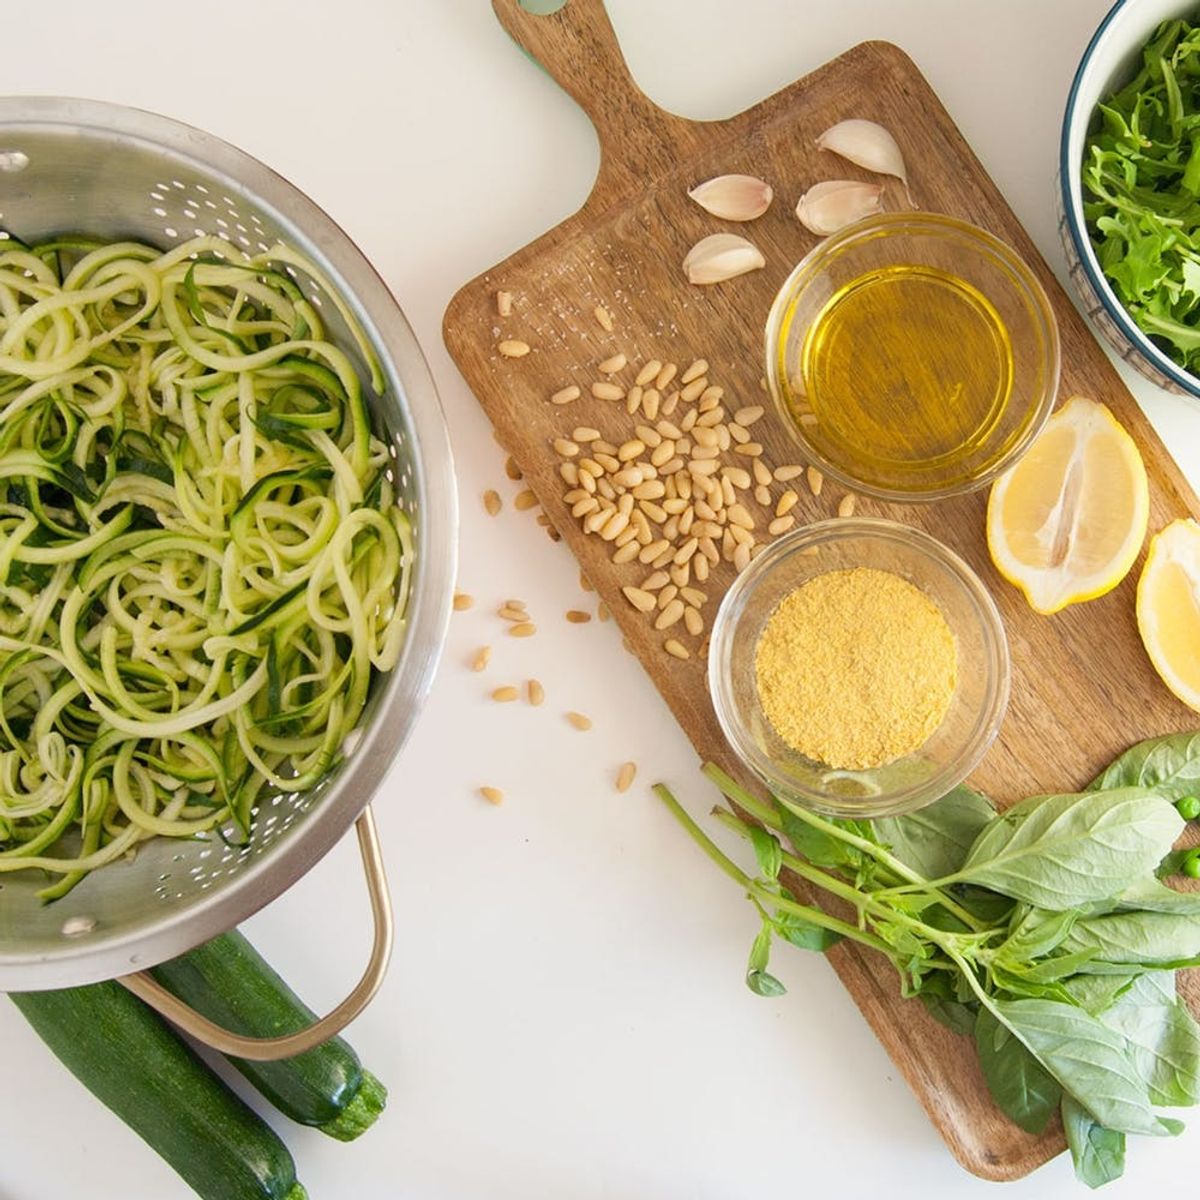 Try This Vegan Pesto Zoodle Dish for Your Next Dinner